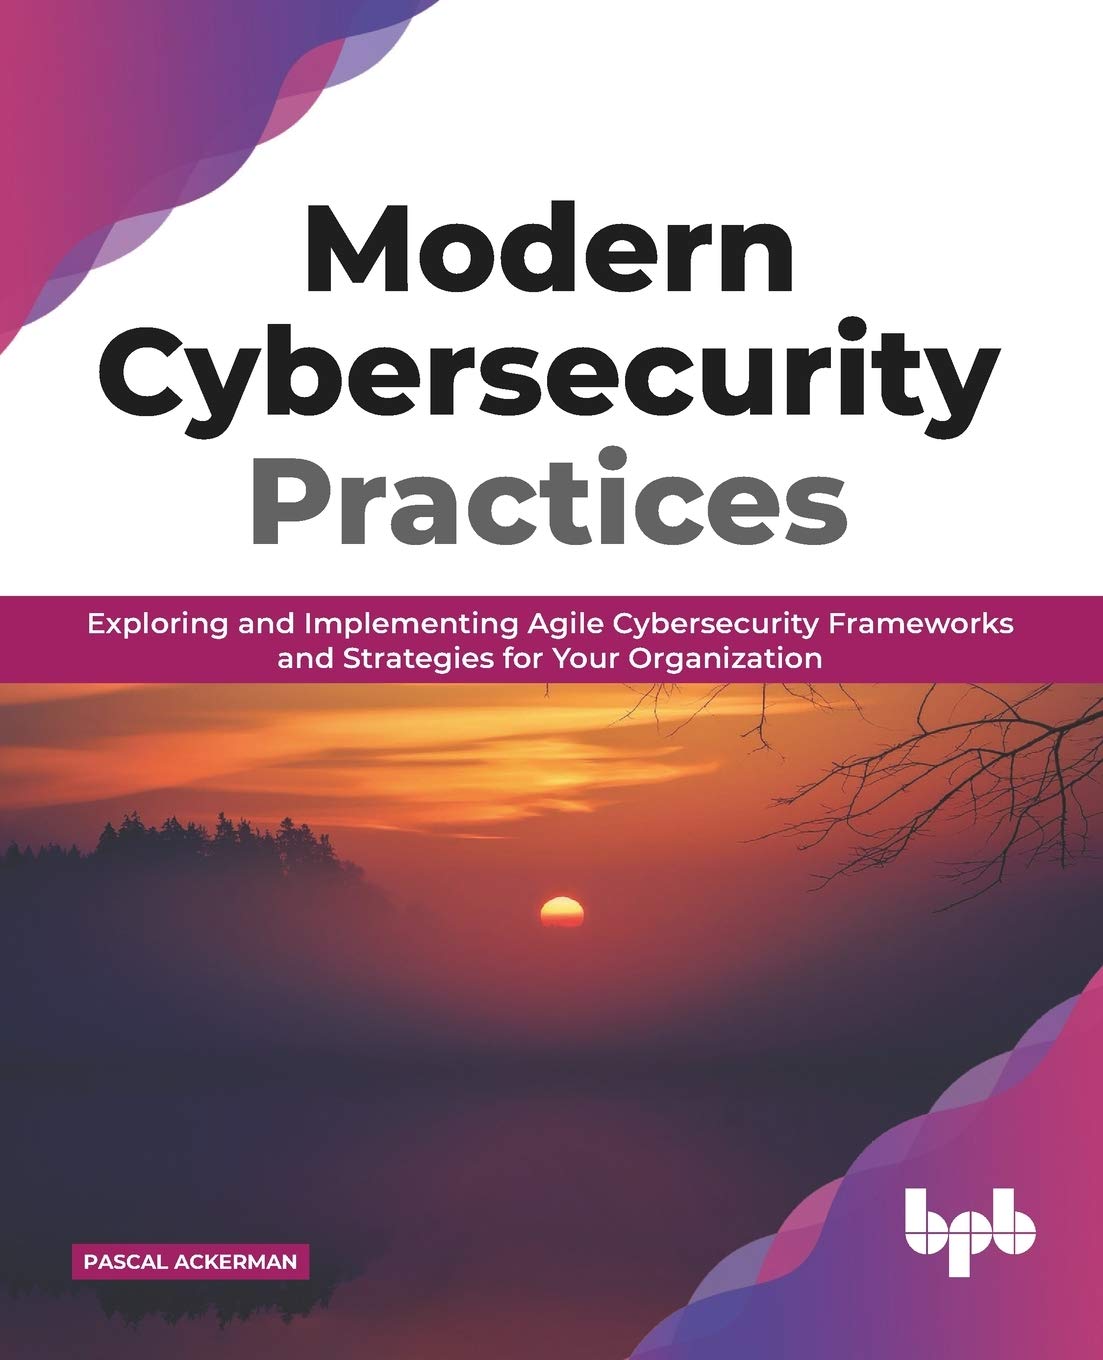 Modern Cybersecurity Practices: Exploring And Implementing Agile Cybersecurity Frameworks and Strategies for Your Organization by Pascal Ackerman